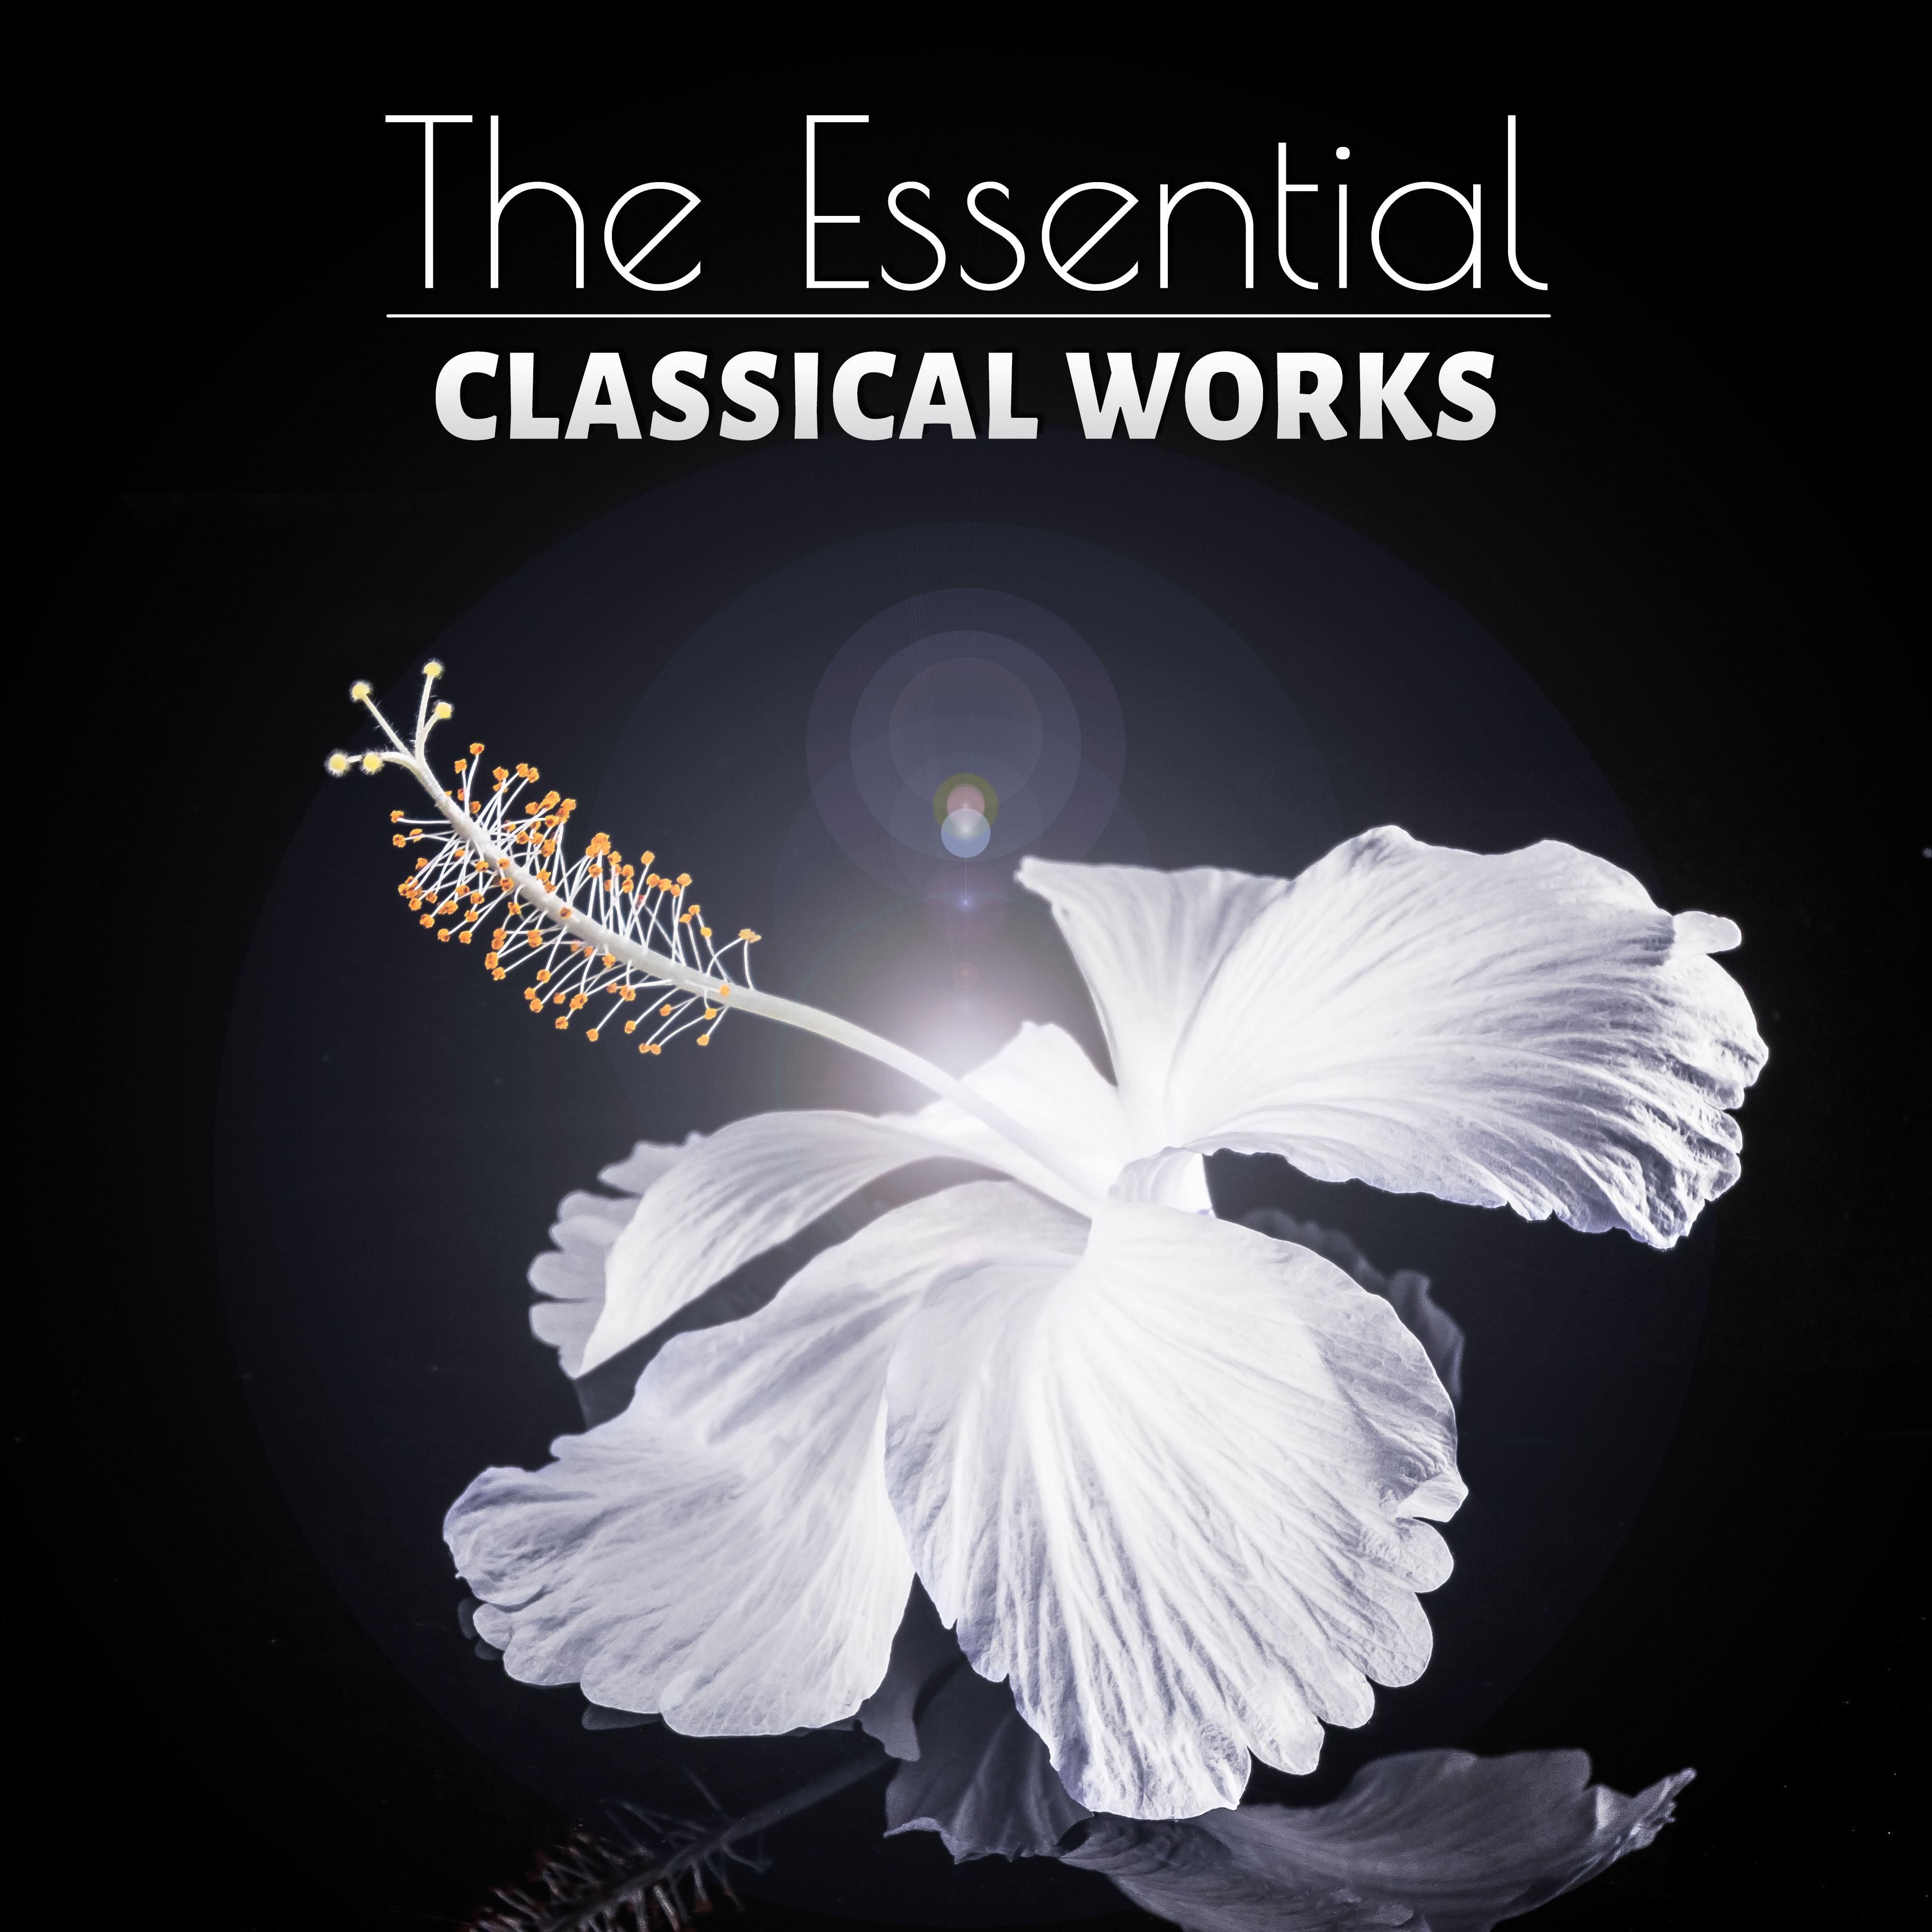 The Essential Classical Works - Relaxing Music for Learning and Reading that Helps to Focus and Concentrate on Work, Rest and Sleep